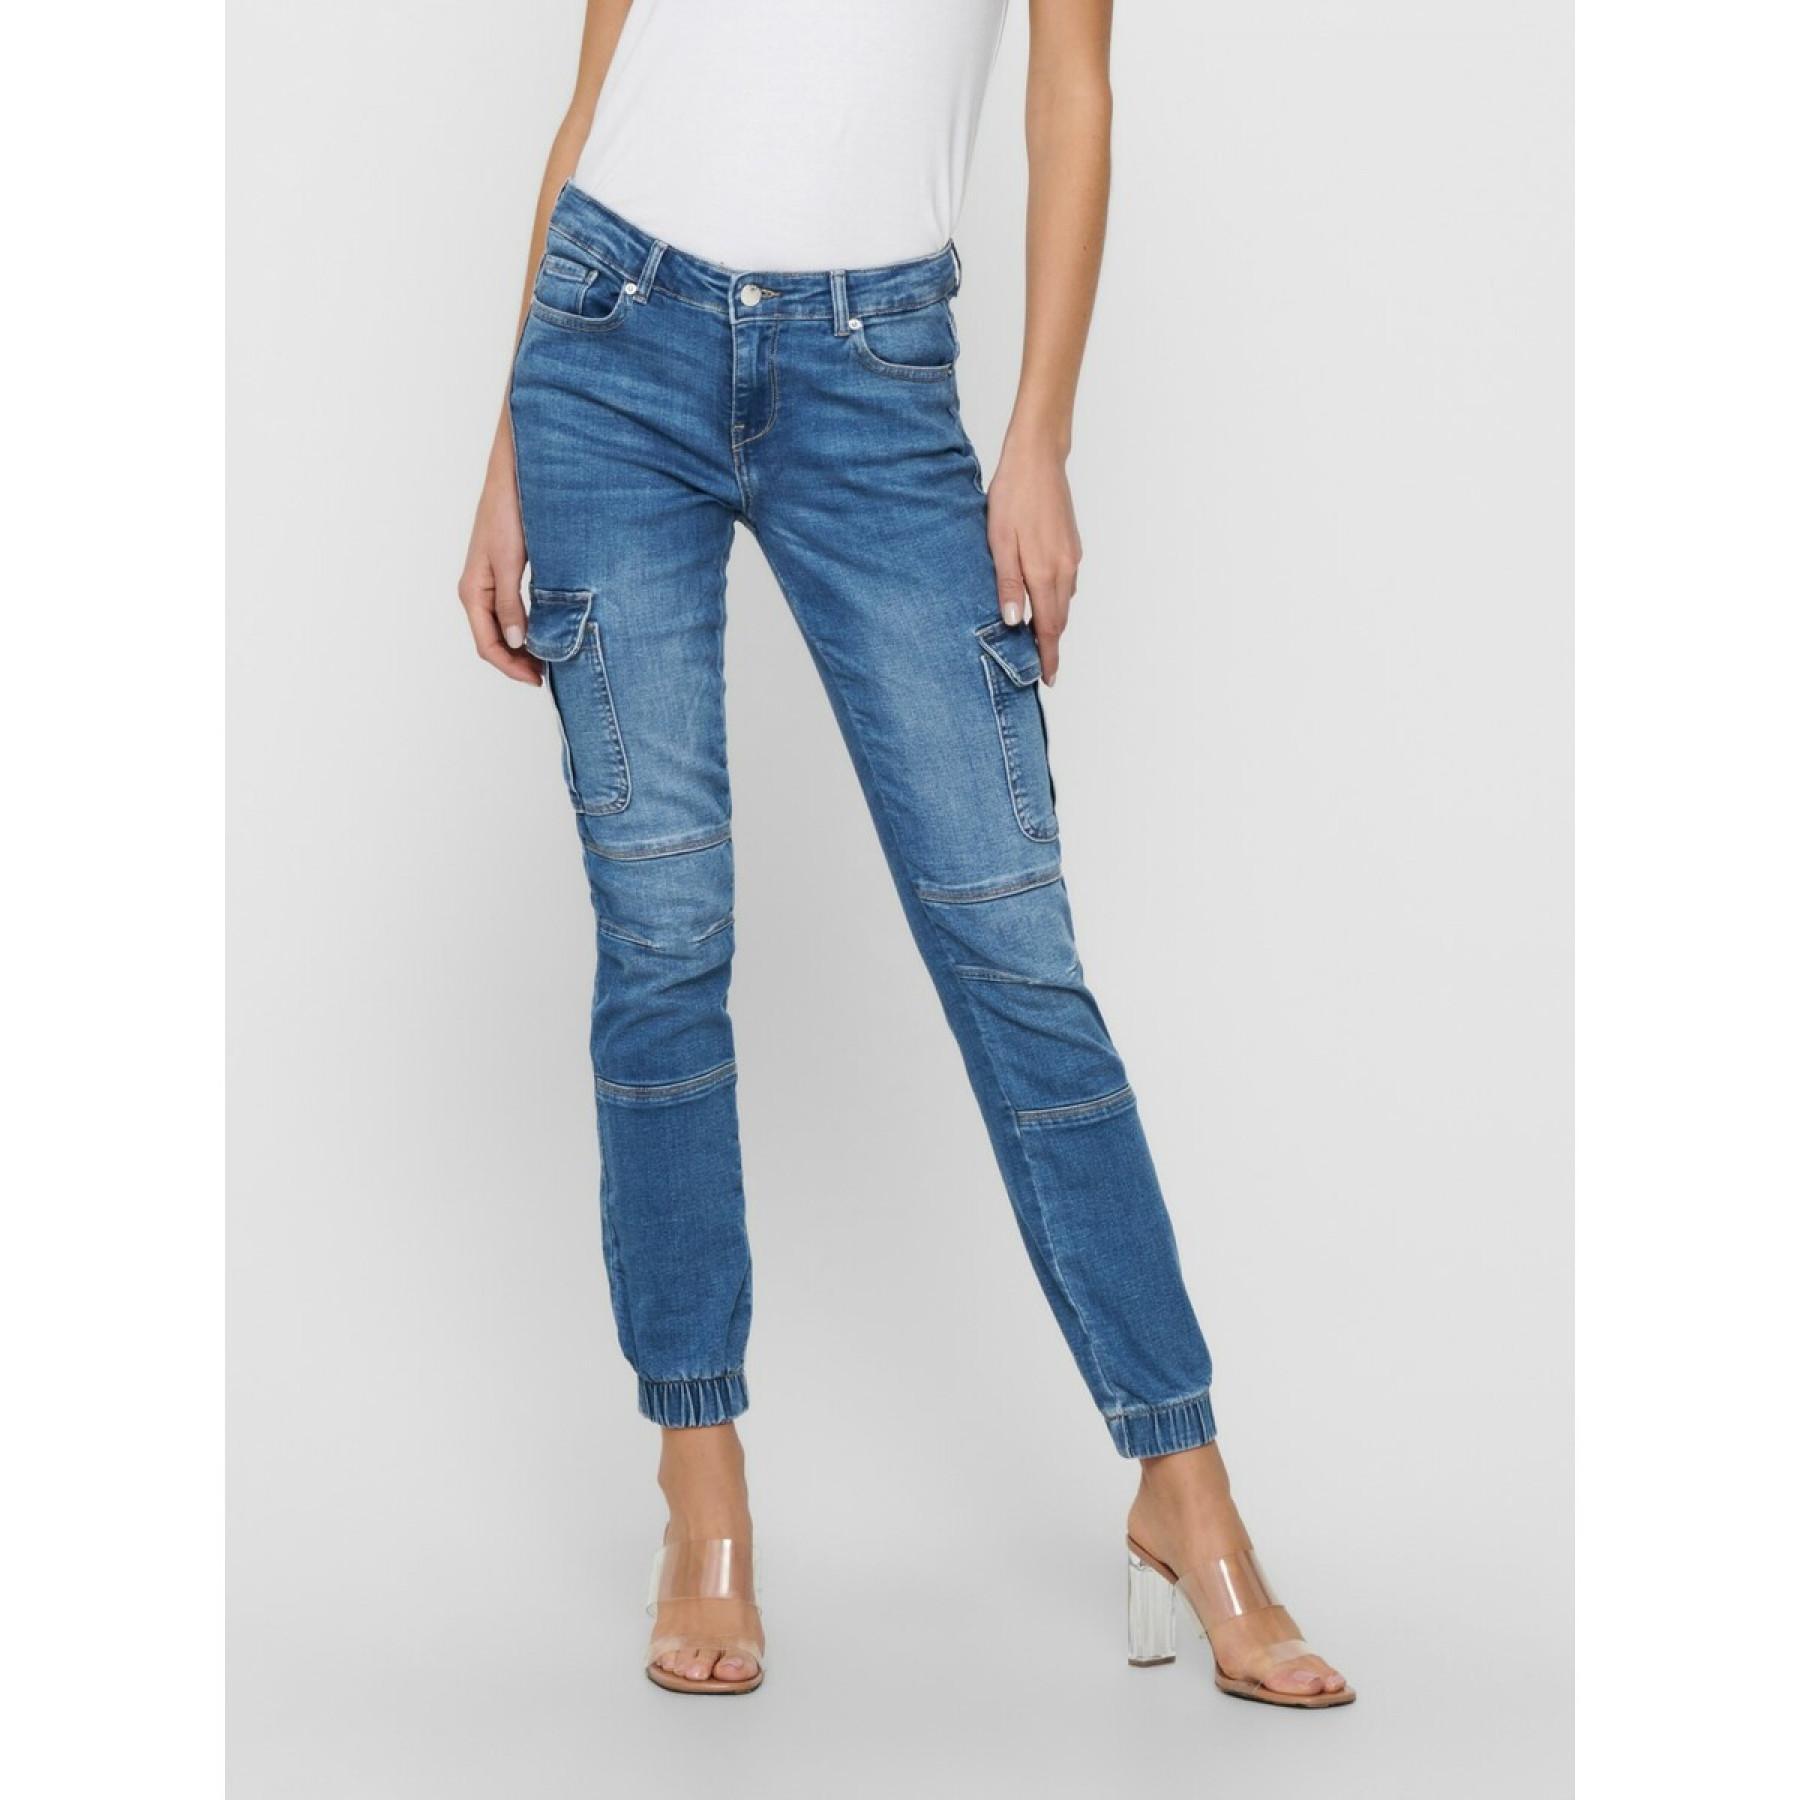 Jeans cargo femme Only Missouri life